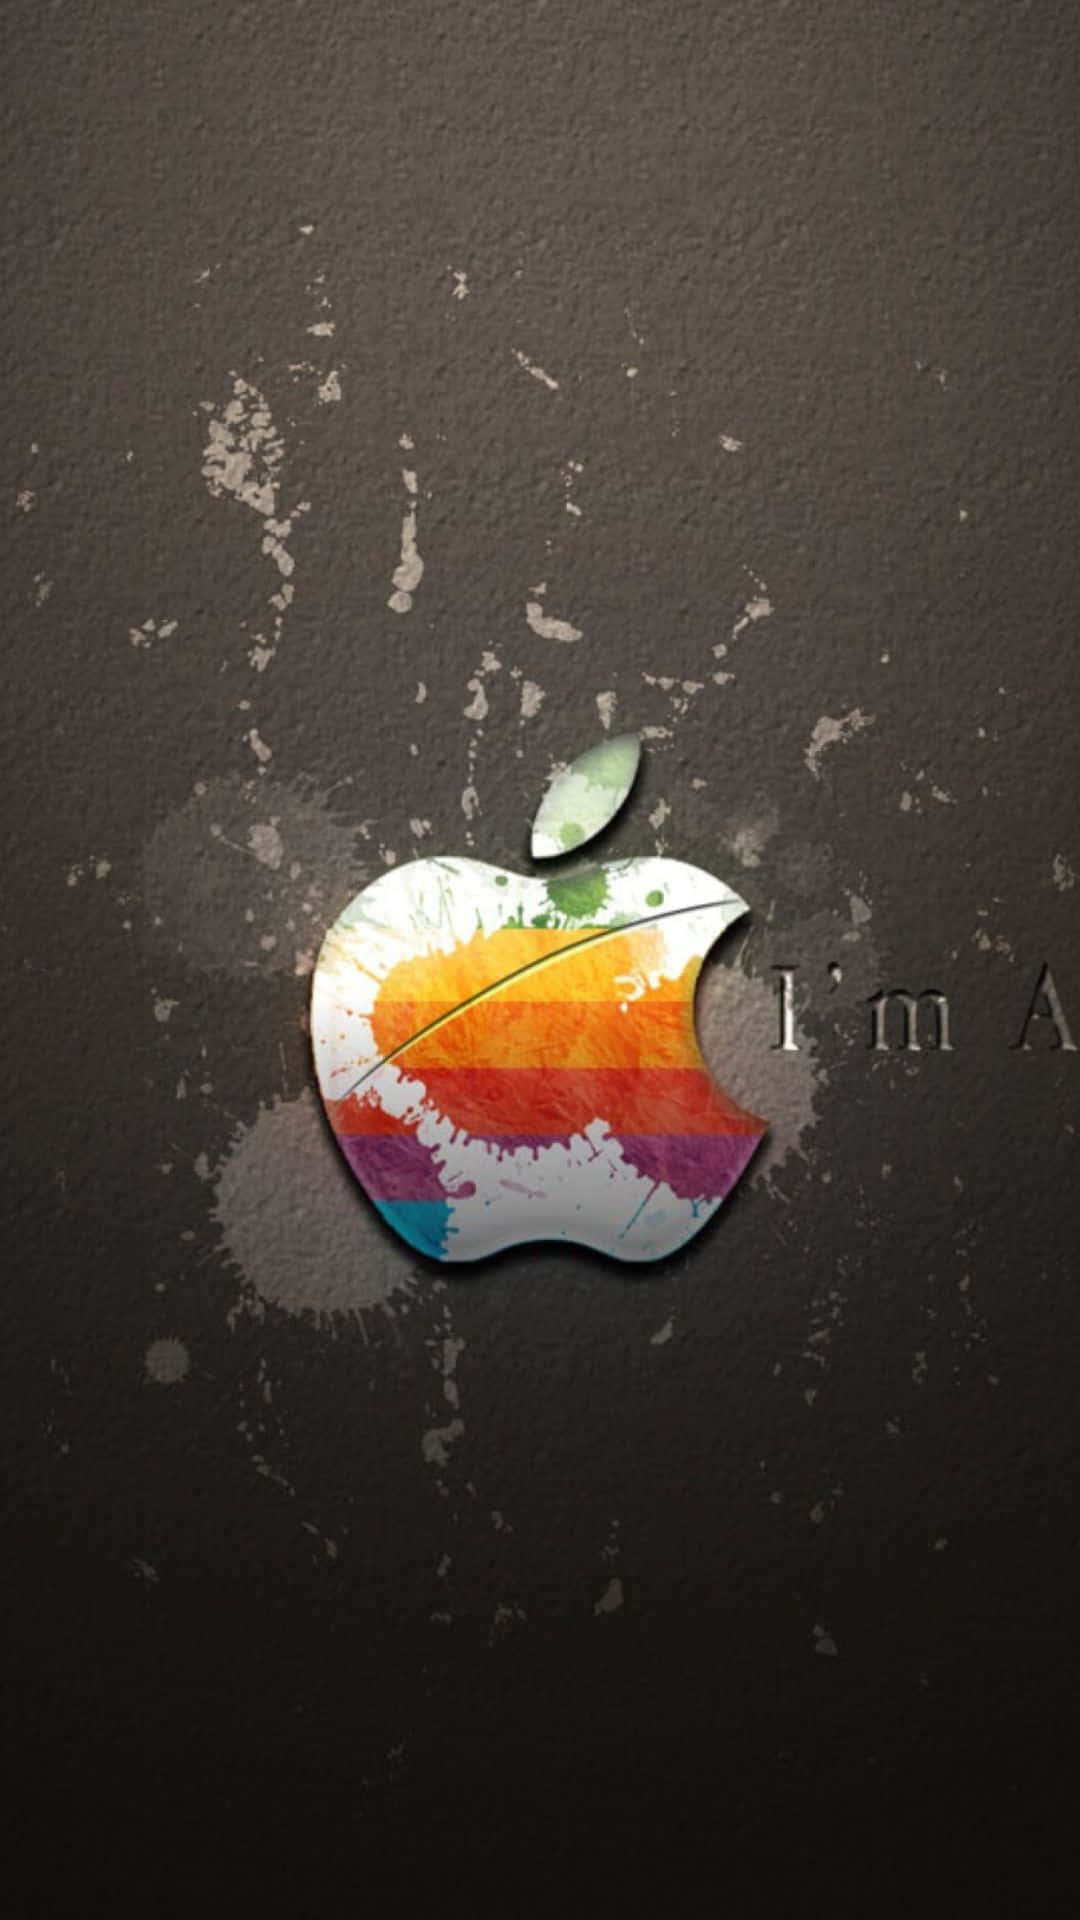 Free Apple Wallpaper Downloads, [500+] Apple Wallpapers for FREE |  